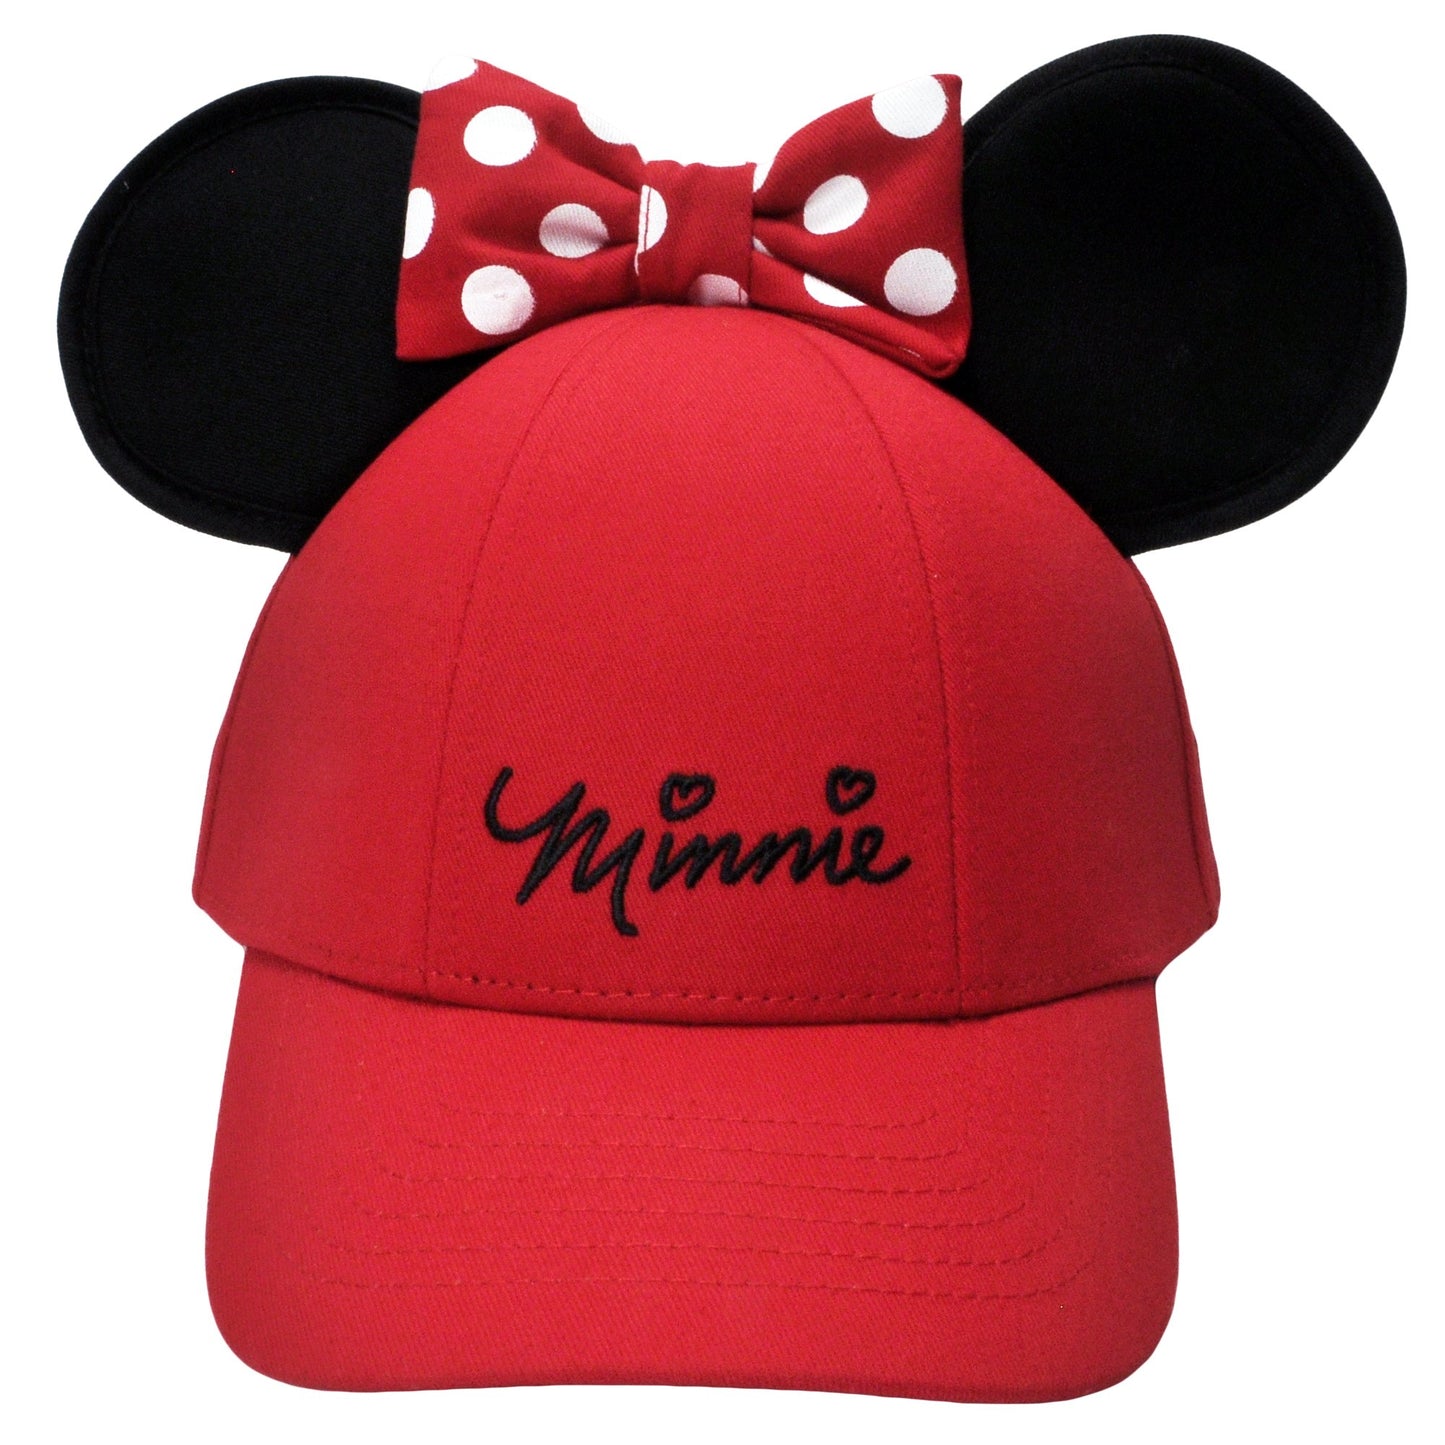 Disney Minnie Mouse Girls Youth Ears Cap, Red